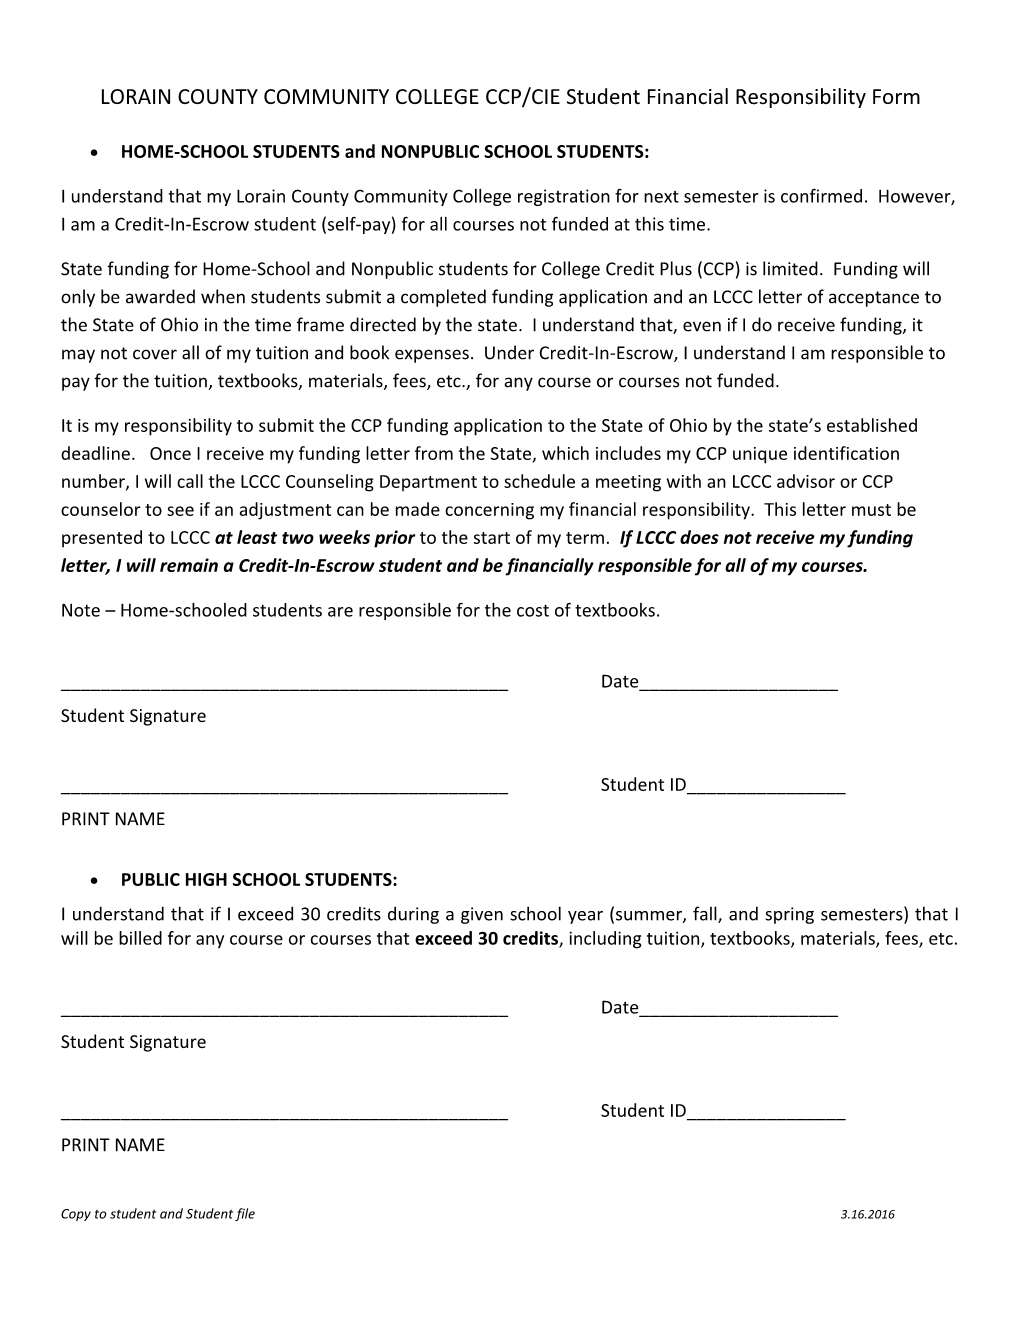 LORAIN COUNTY COMMUNITY COLLEGE CCP/CIE Student Financial Responsibility Form